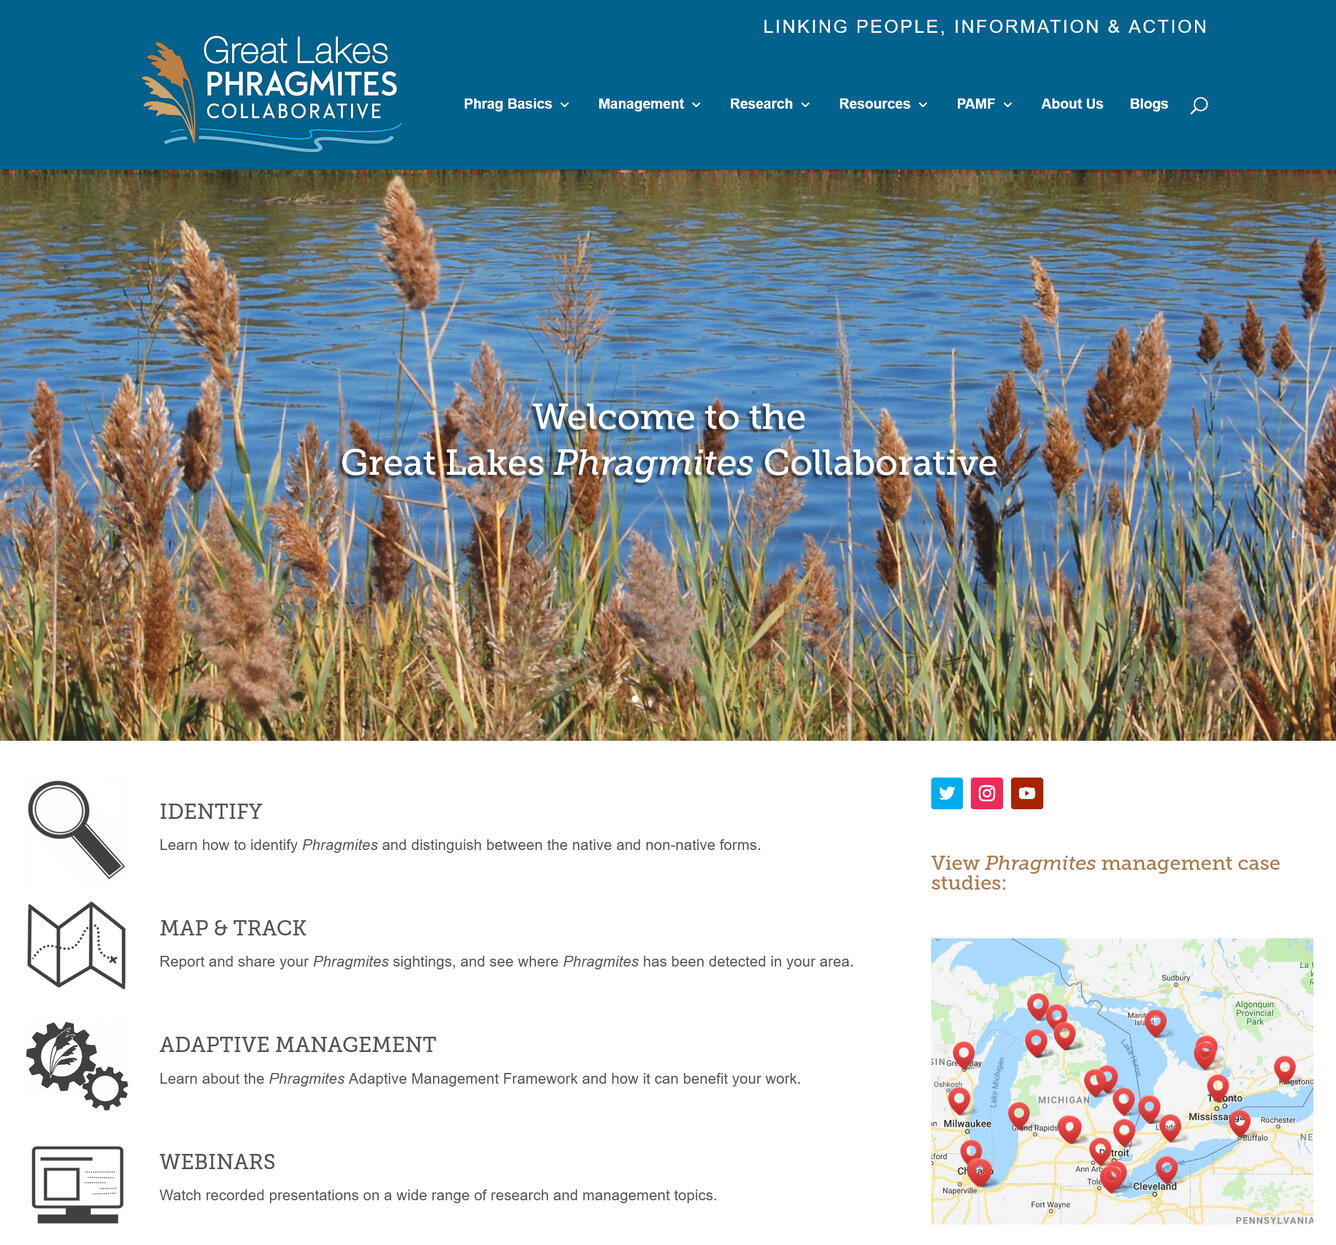 Great Lakes Phragmites Collaborative Home Page